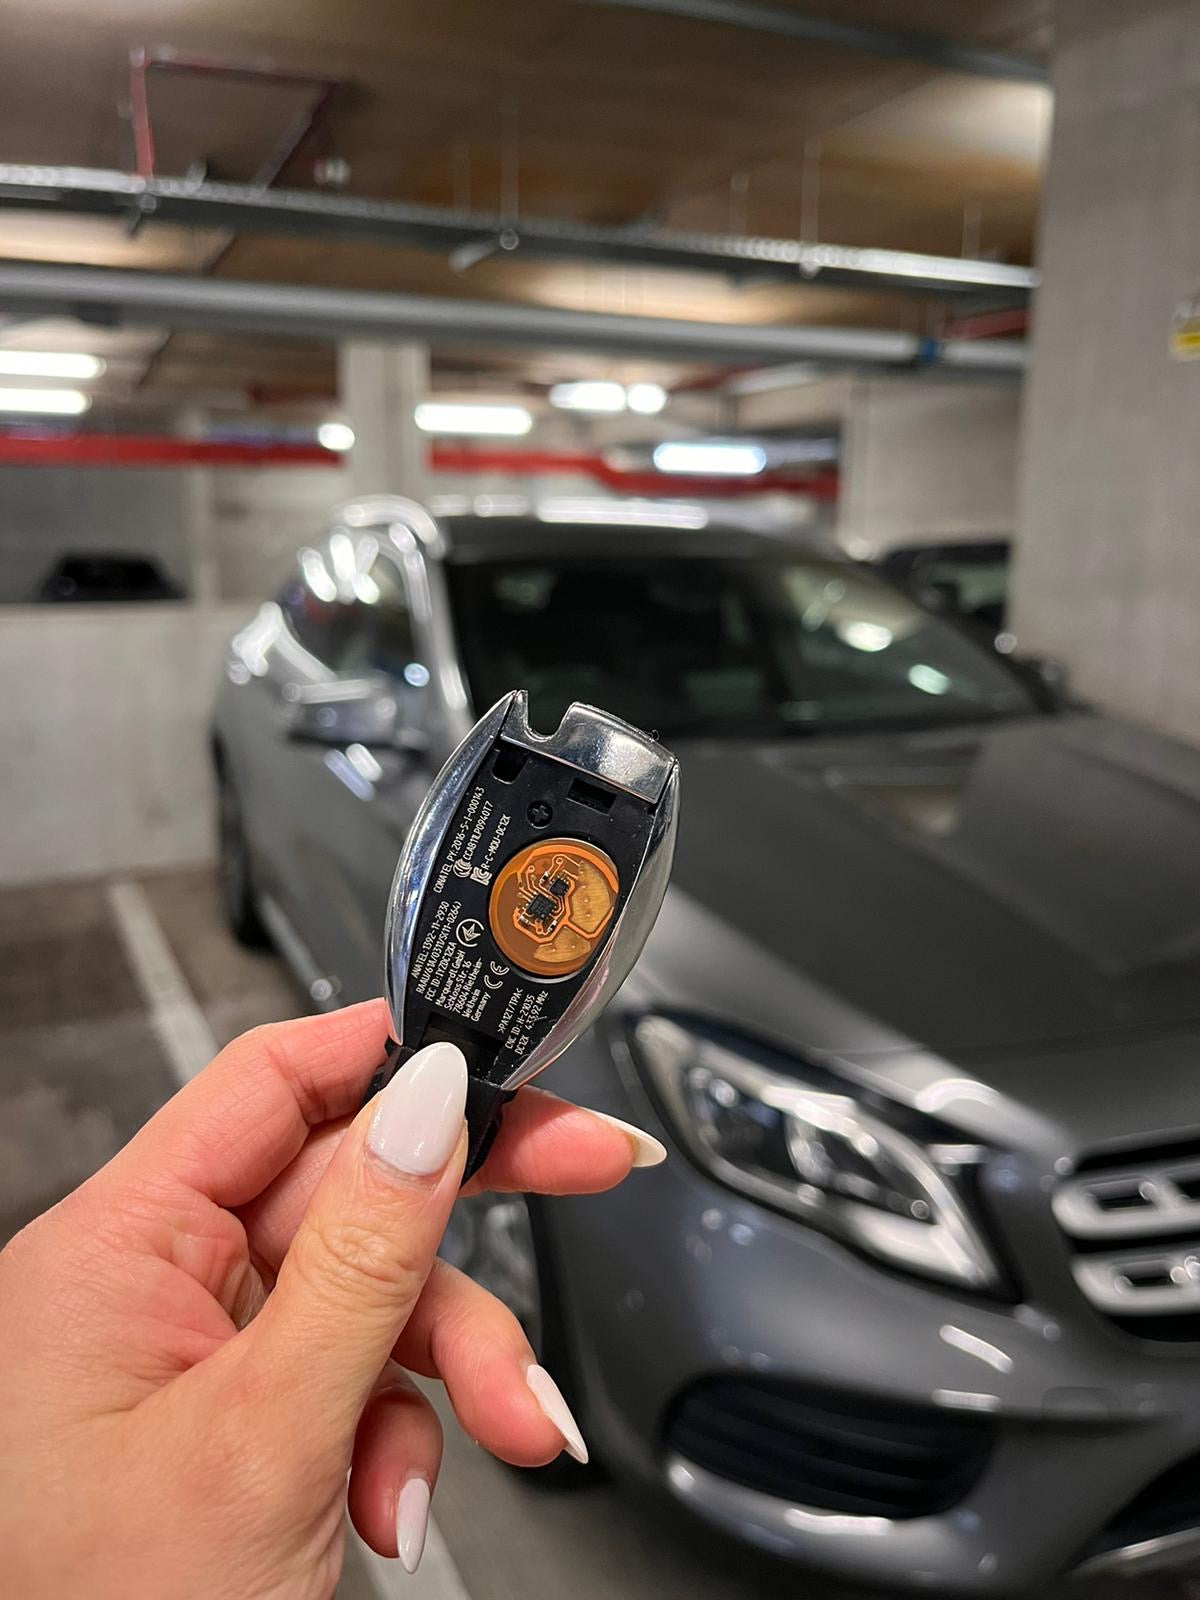 Mercedes car key with KEYSHIELD anti-theft security sleeve installed to prevent stolen car